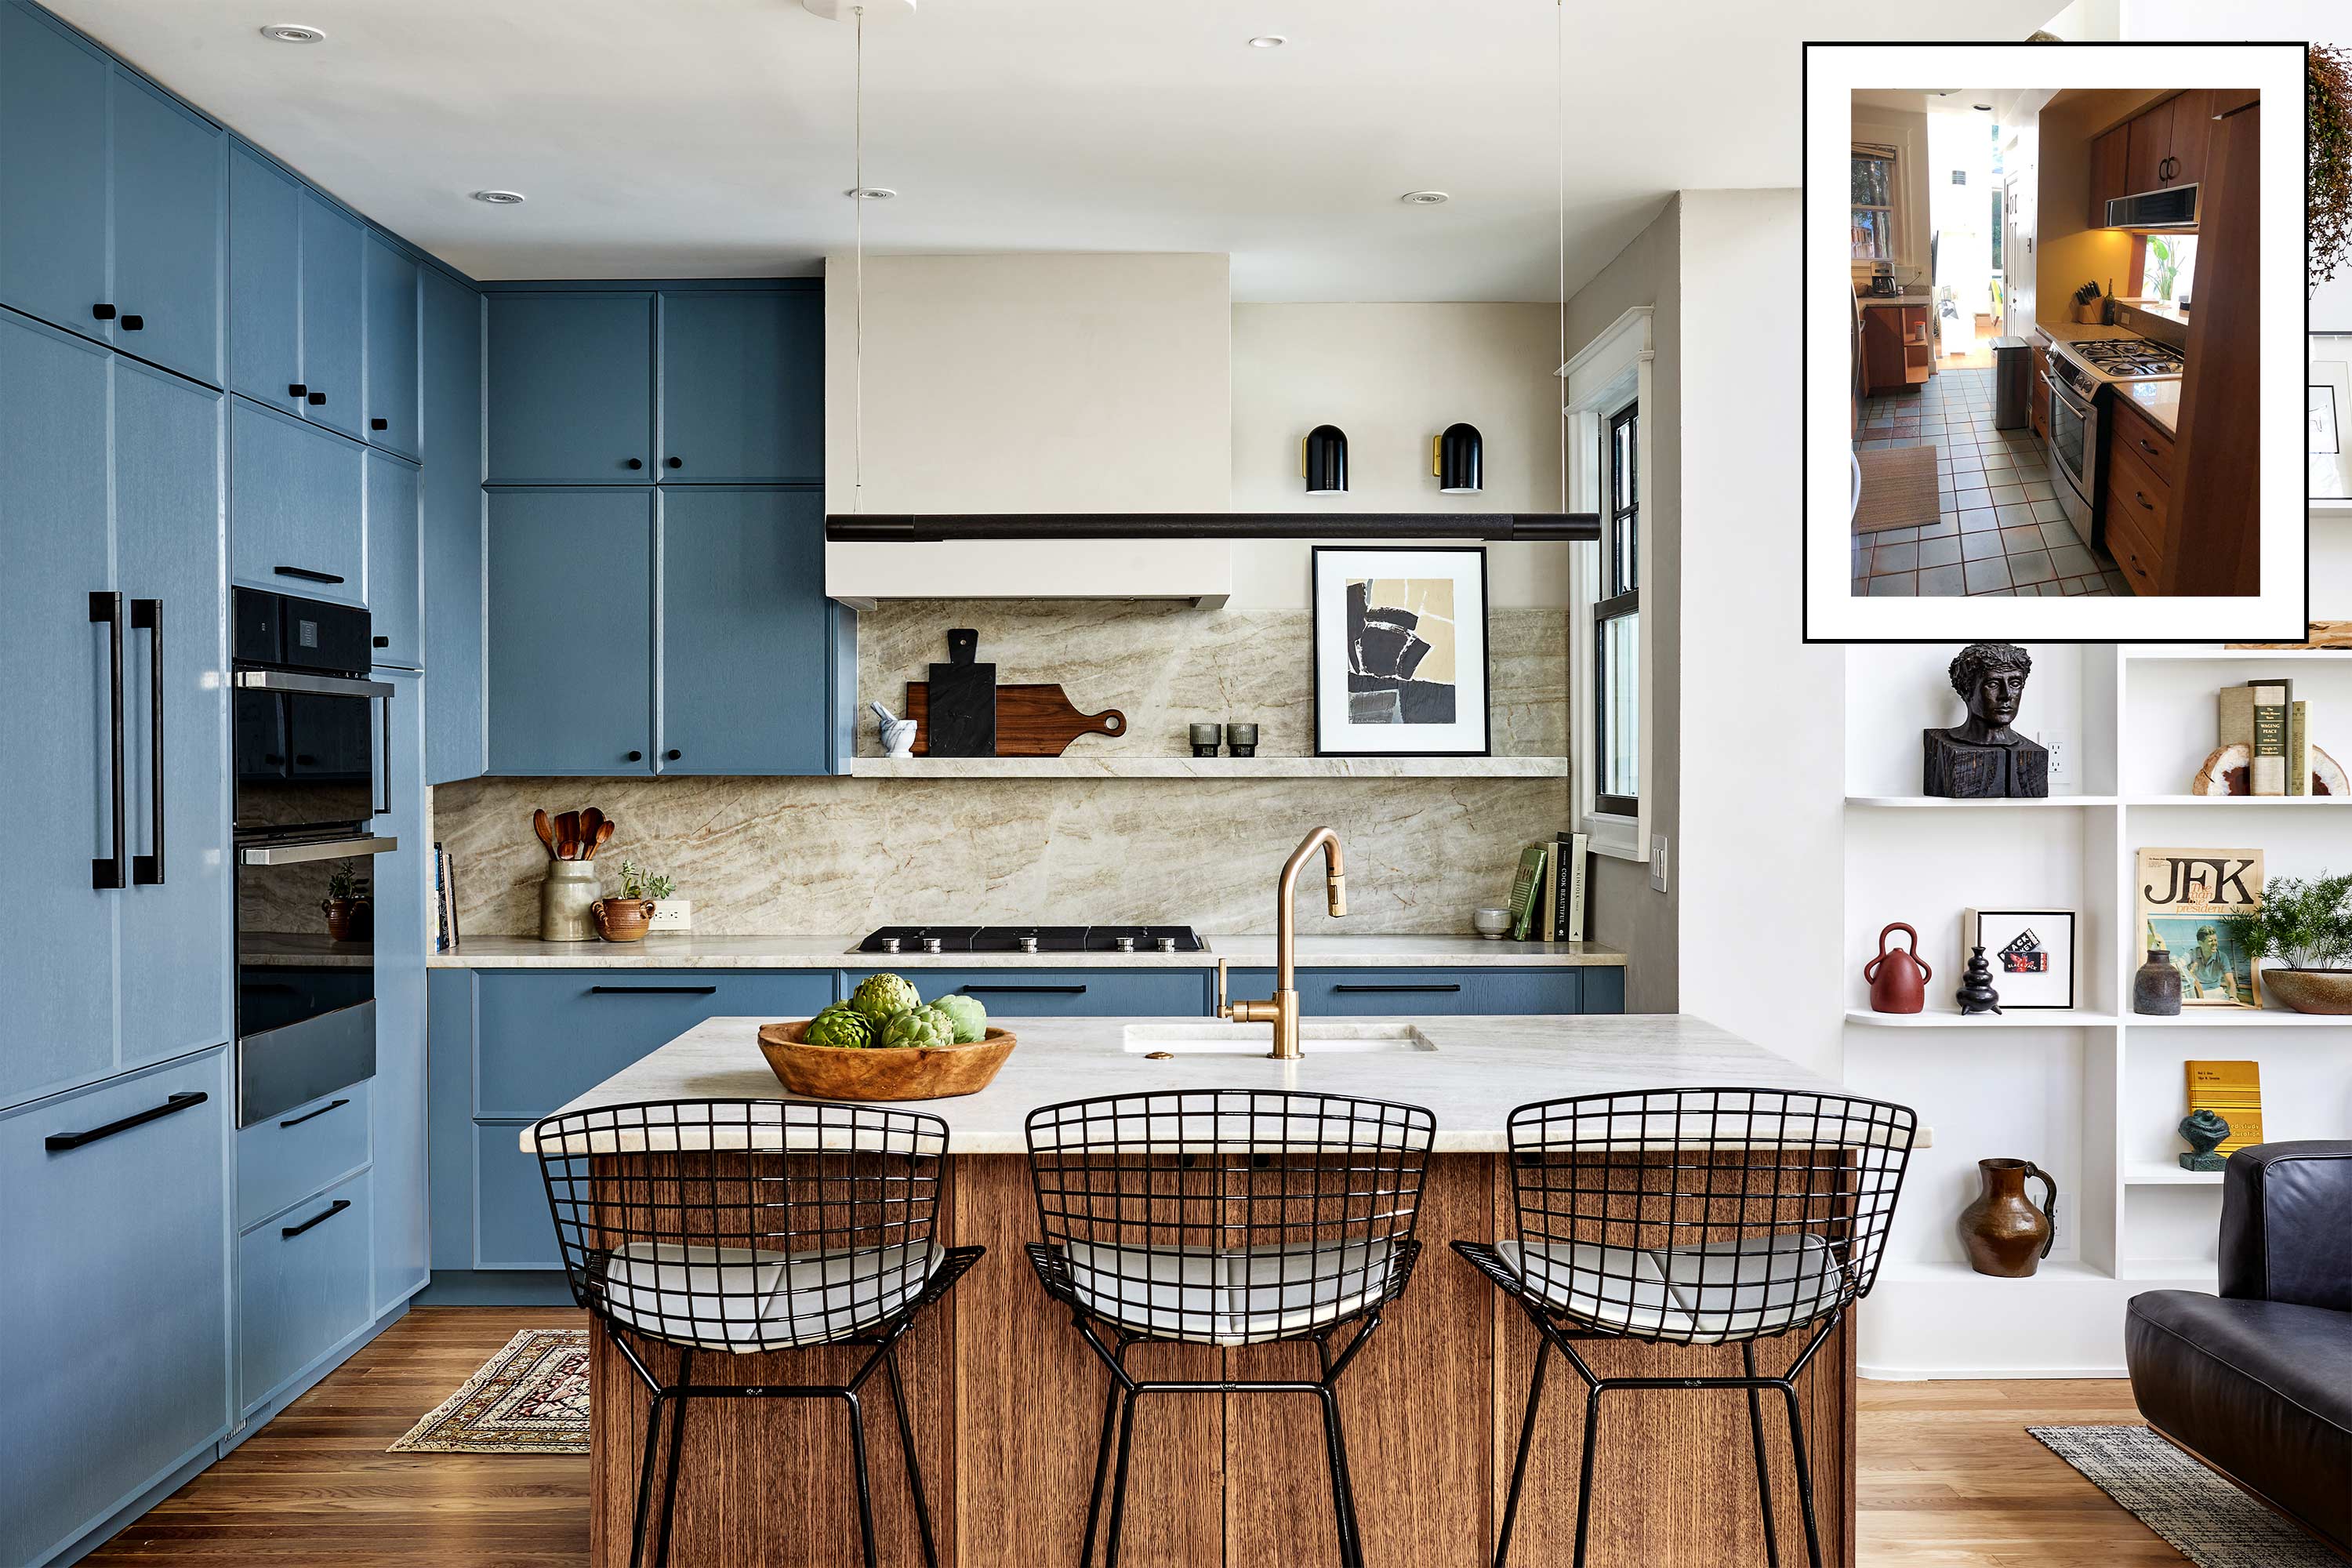 This DC Rowhouse Renovation Includes Dramatic Built-In Shelving and a Blue Kitchen